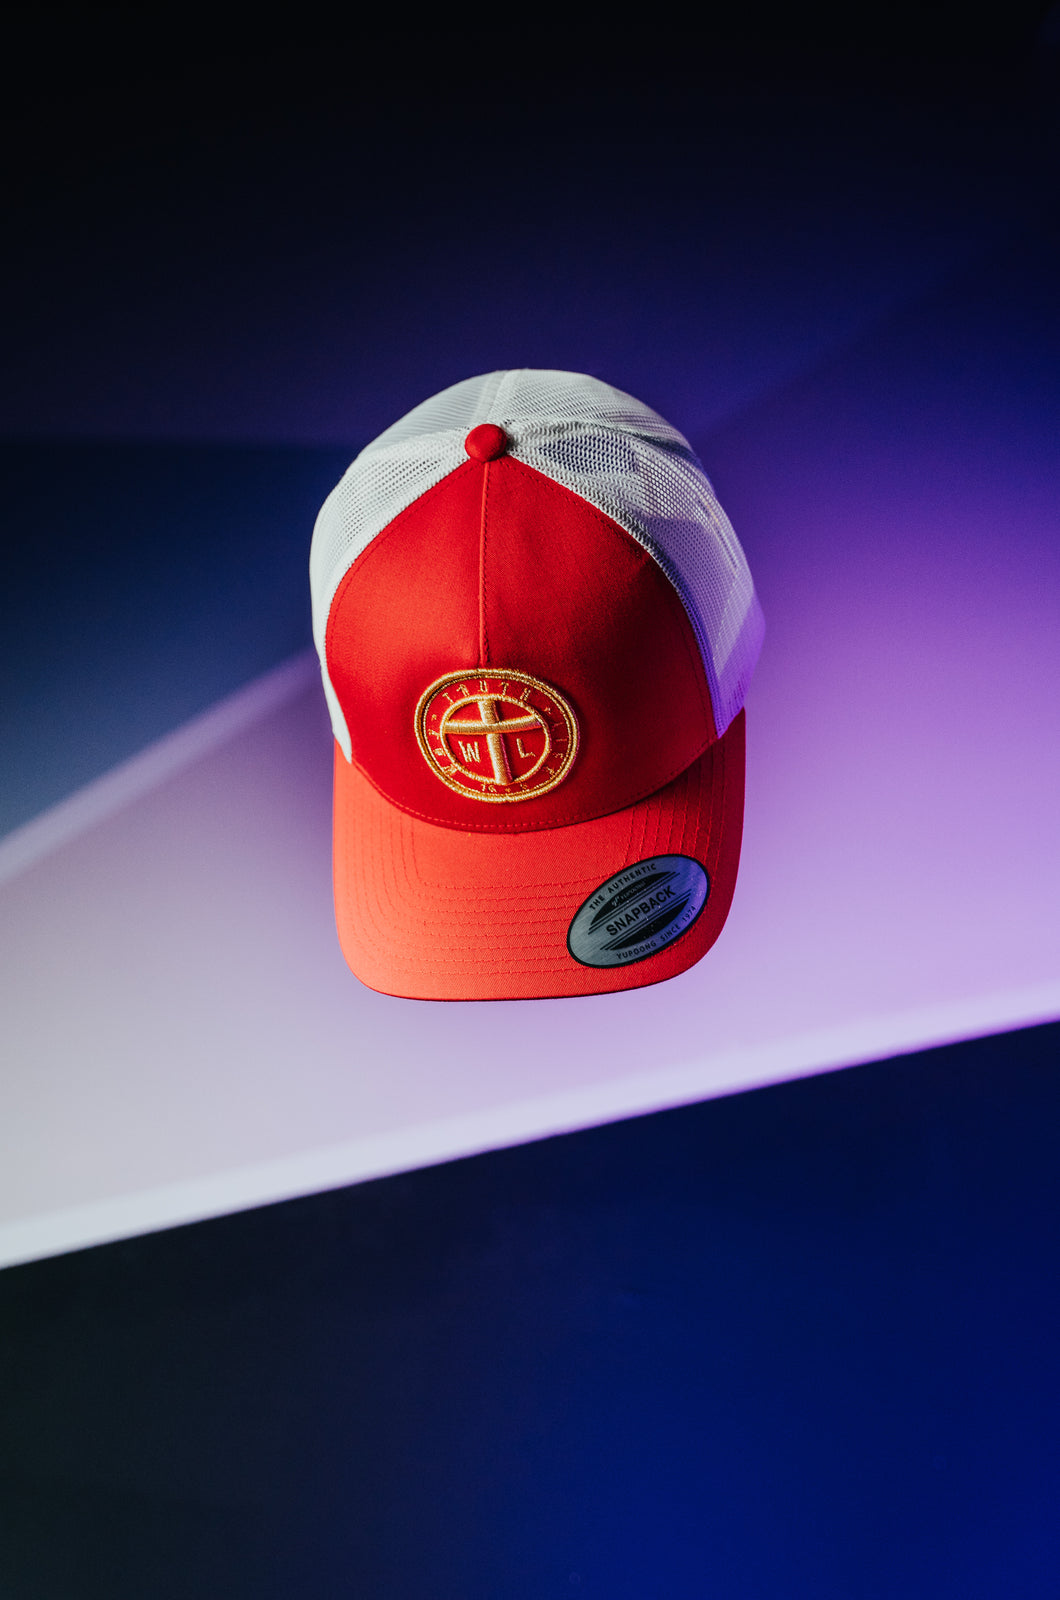 The Truth/Trucker Cap (Red - White -Gold)